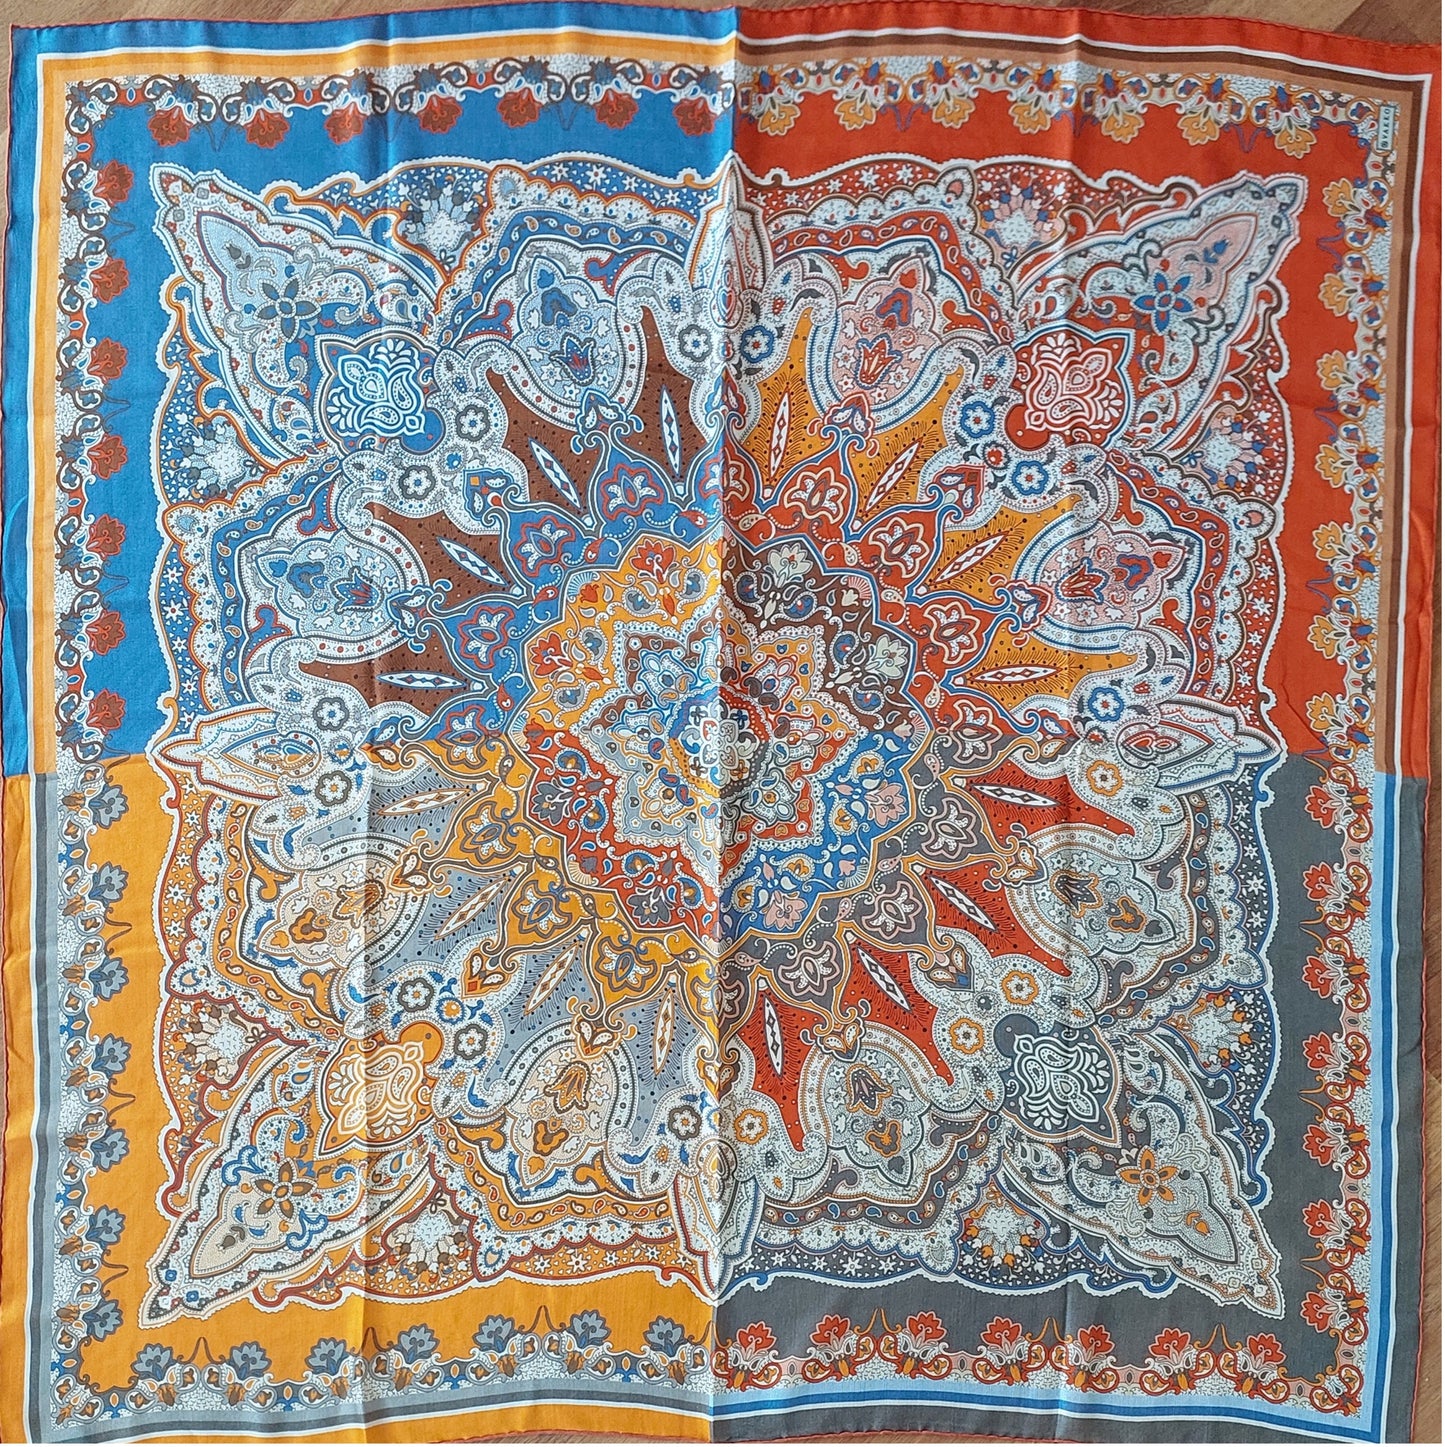 Great Gift Woman Shawl Light Weight 4 Squares Design Blue Grey Orange Red Colours Hand rolled Great Gift for Her